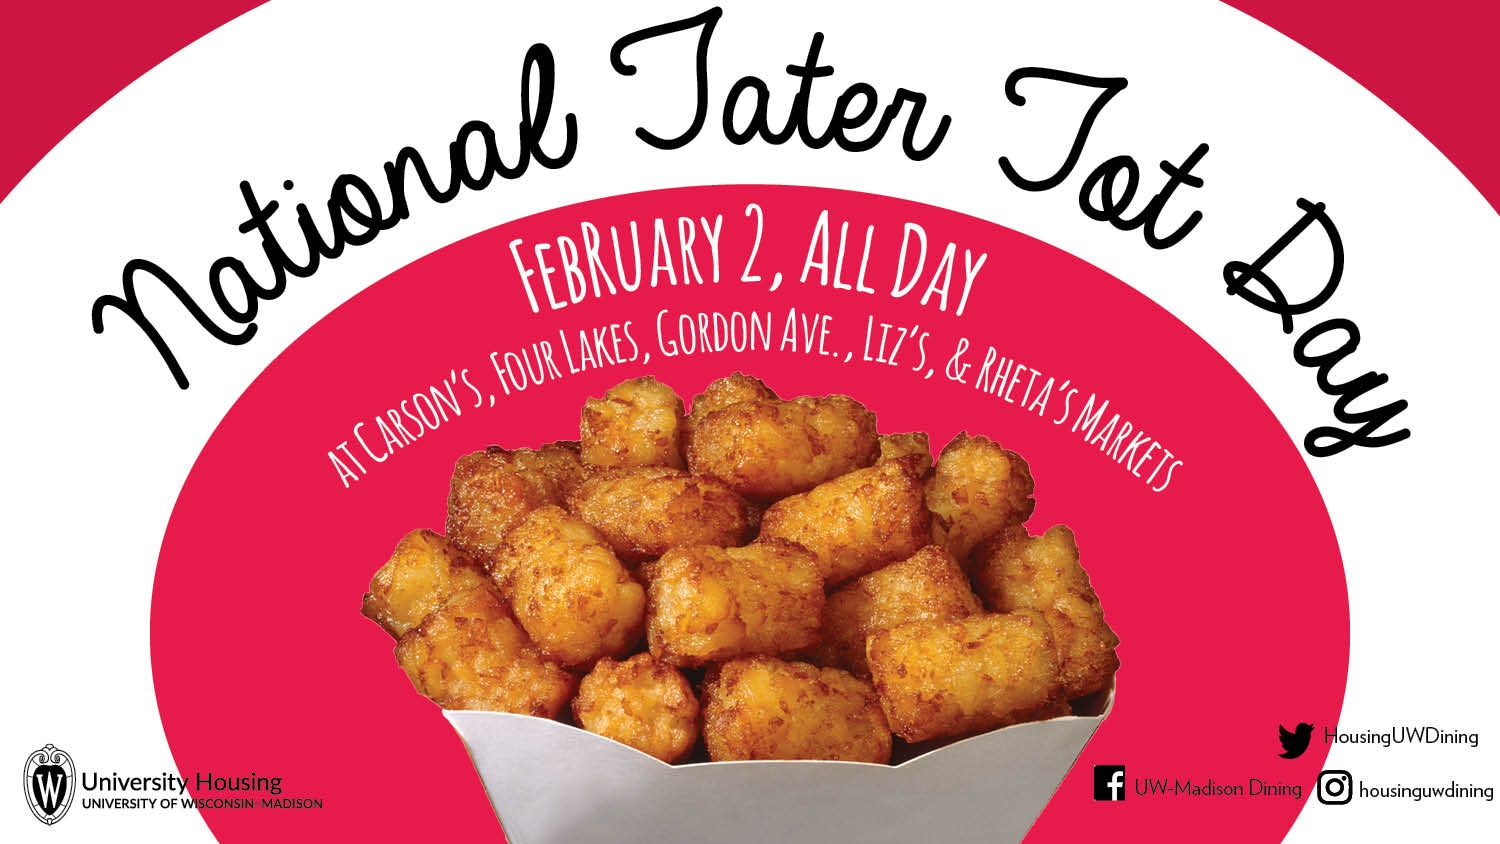 National Tater Day 2019 | Qualads